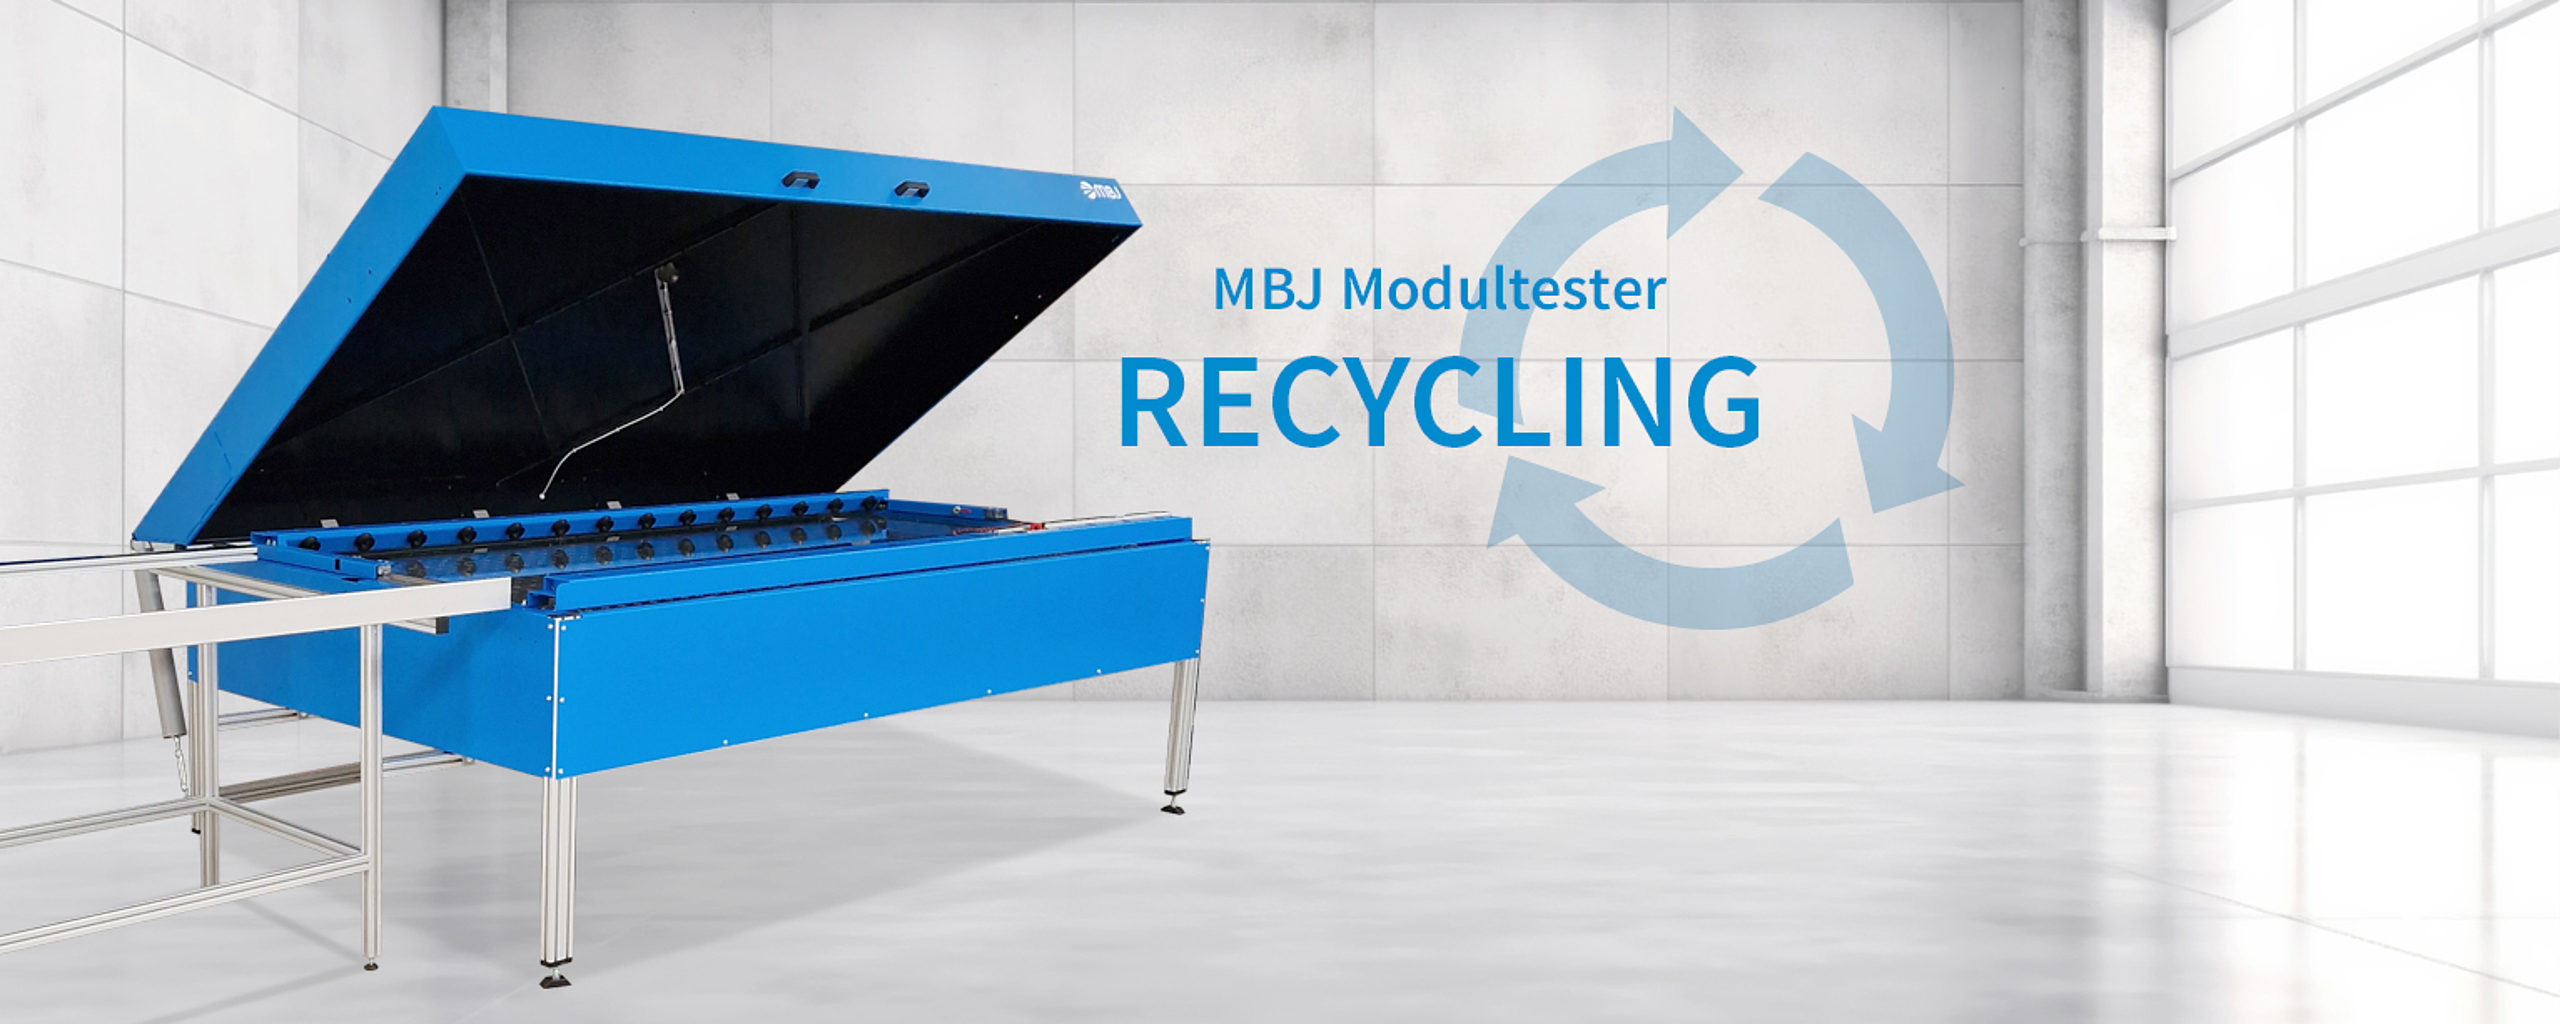 MBJ Modultester Recycling